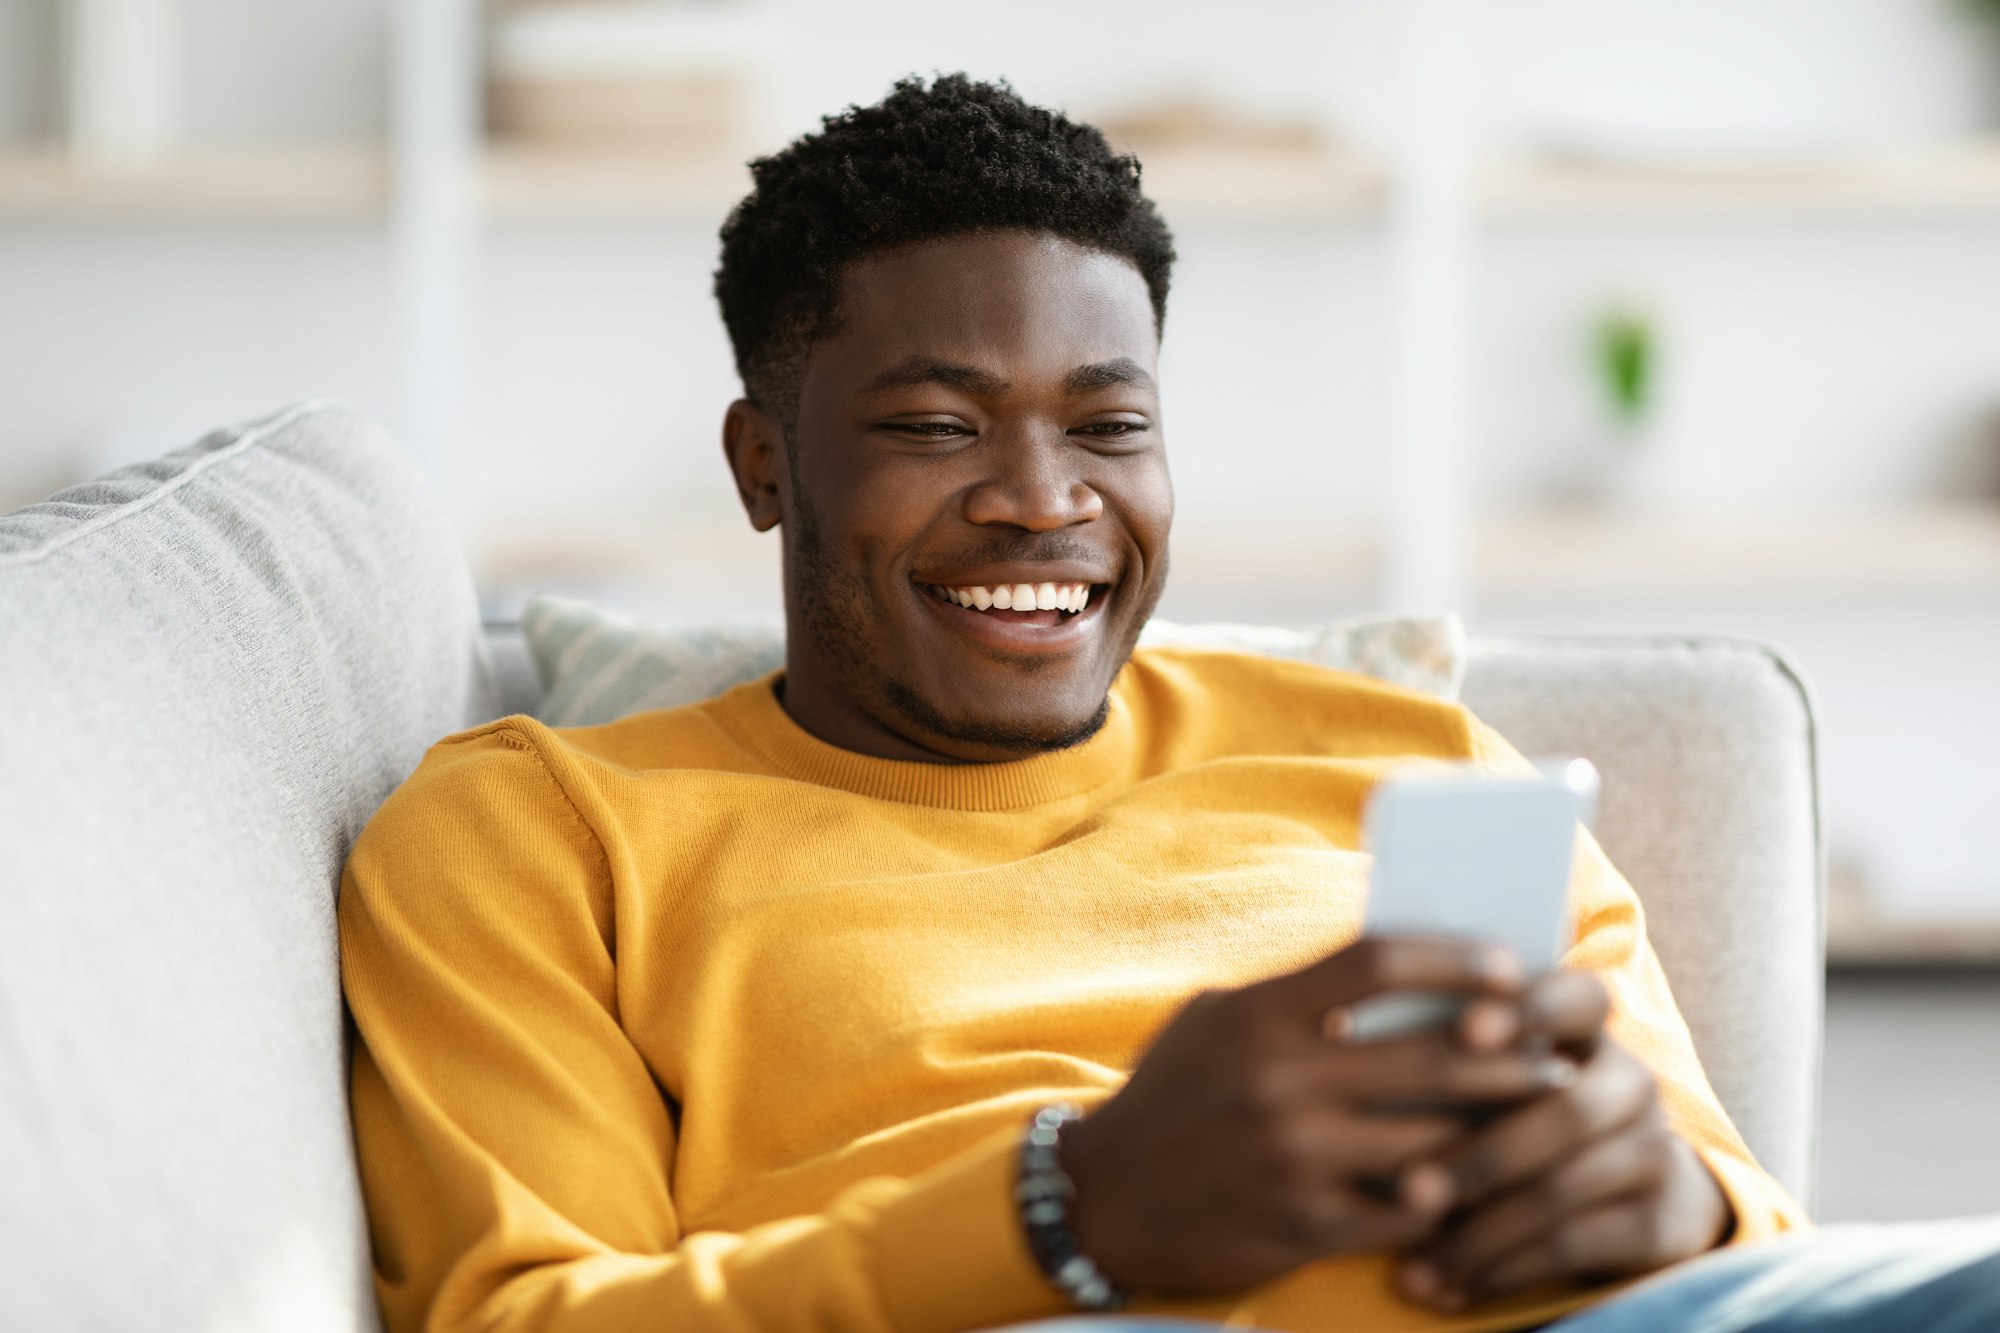 Smiling man reclining on a couch with a cellphone, depicting the relaxed post-care of Pocket Reduction surgery at Schlueter Periodontics.